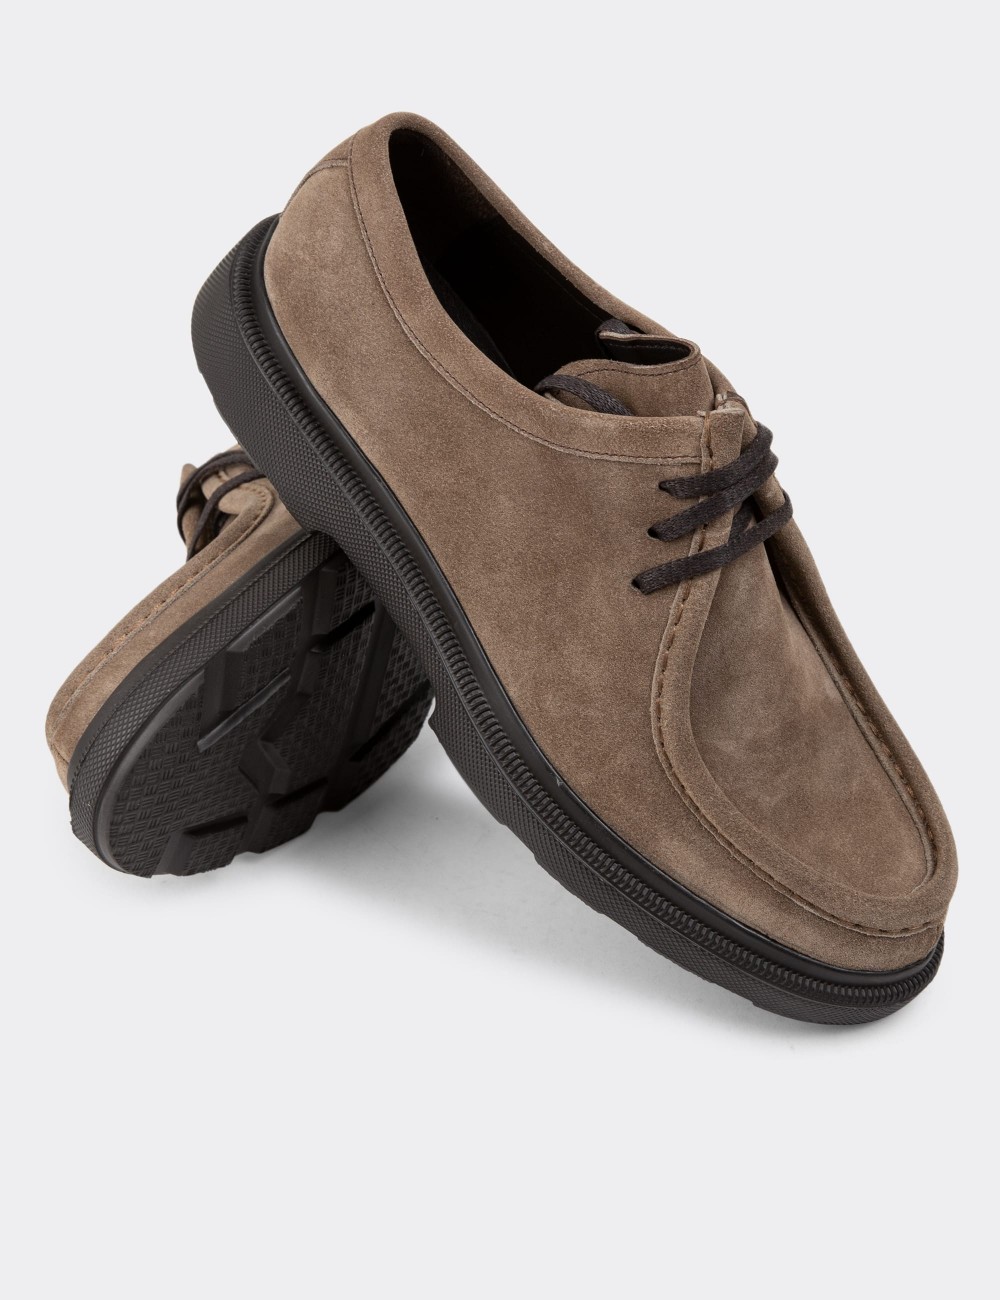 Sandstone Suede Leather Lace-up Shoes - 01851MVZNP01